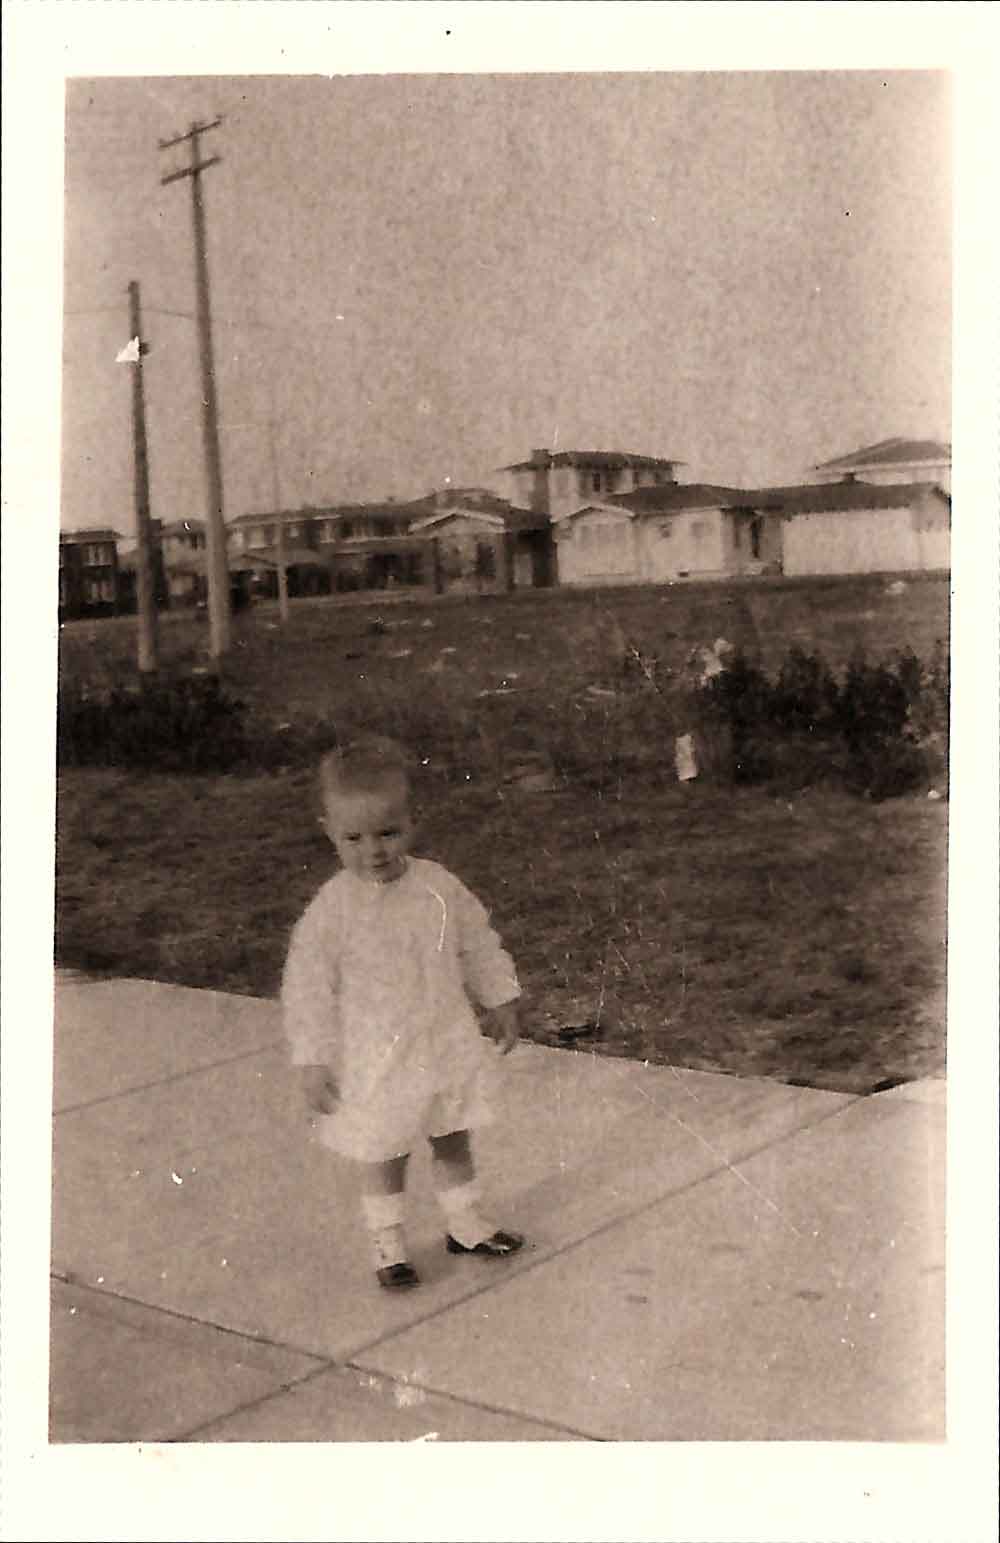 (HTC.2010.8.17) - Hightower Child (probably Frank) on the Drive of 409 NW 21, View Northeast of 300 Block of NW 22, c. 1926